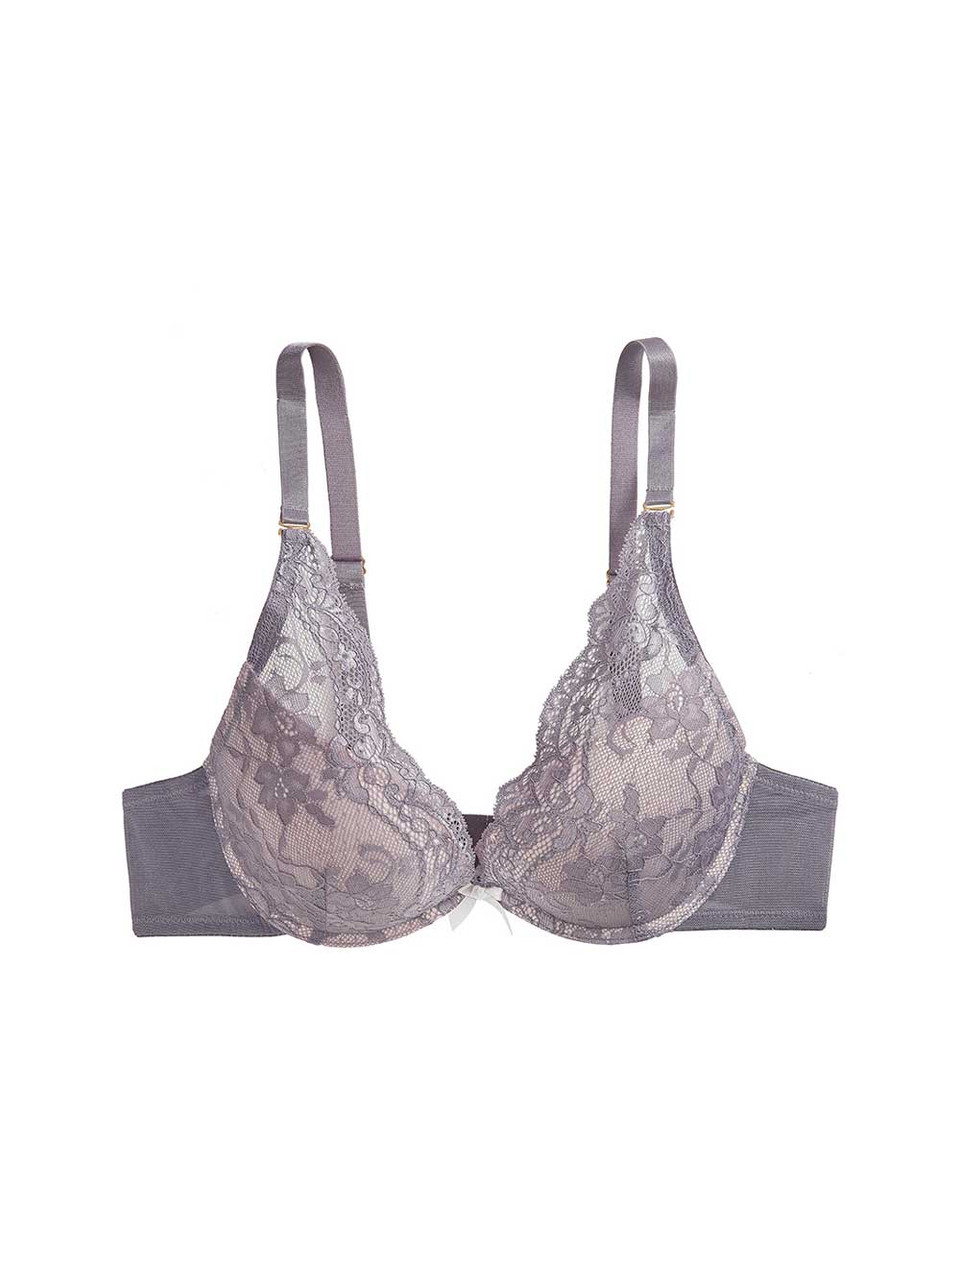 The Little Bra Company Olivia Deep Plunge Smooth Contour Bra in